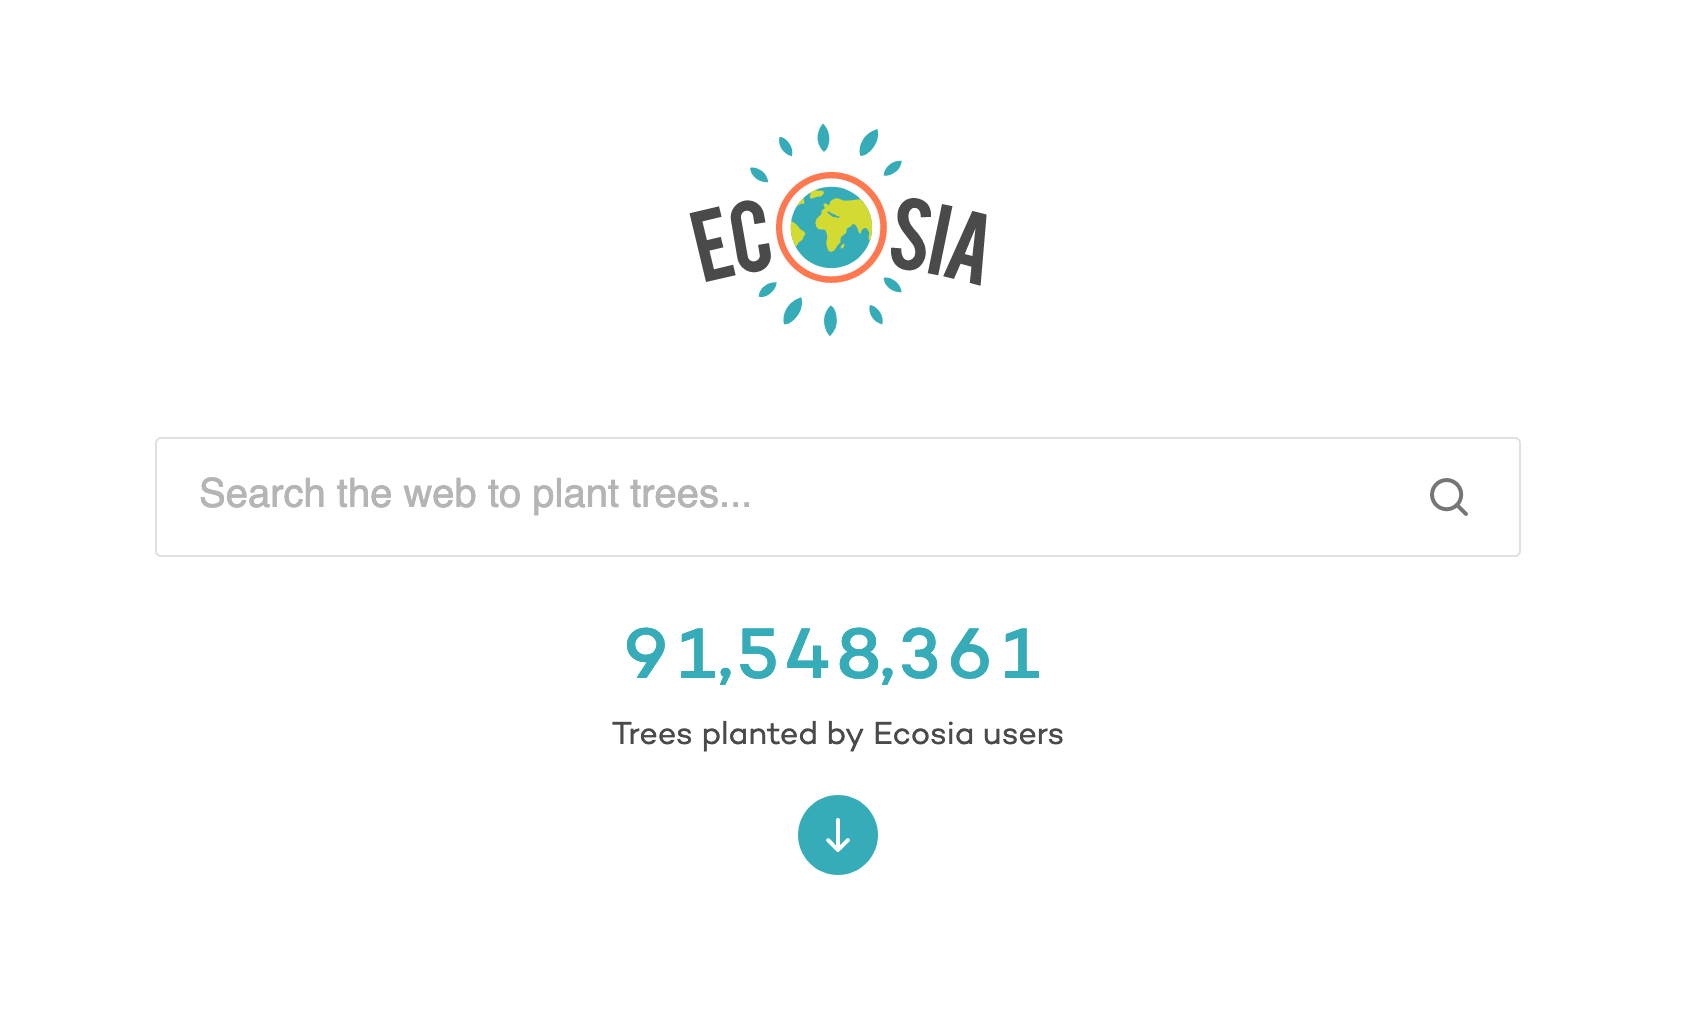 How to Support Our Planet's Conservation through Every Day Internet Browsing